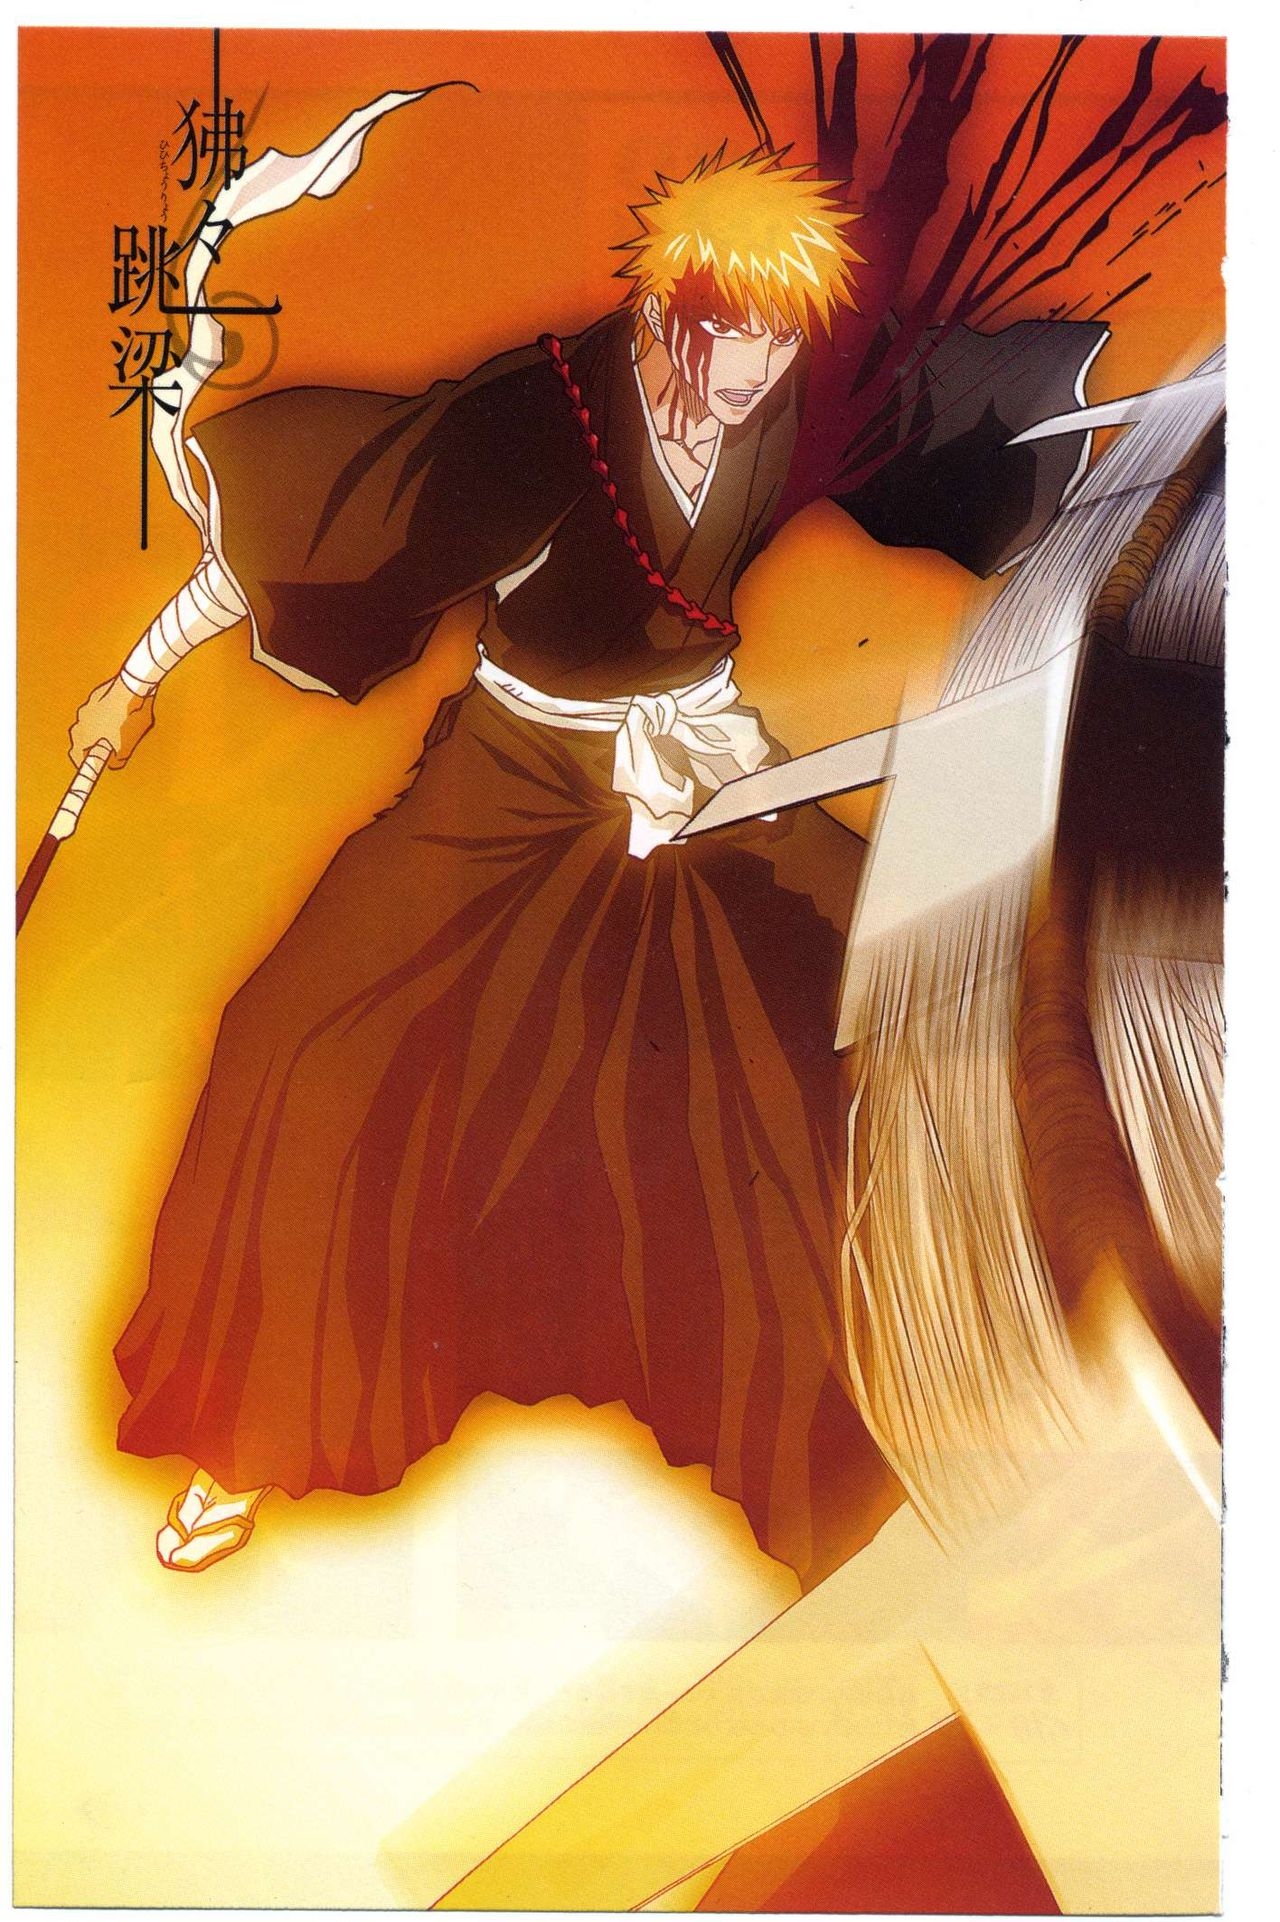 Bleach: Official Animation Book VIBEs 91